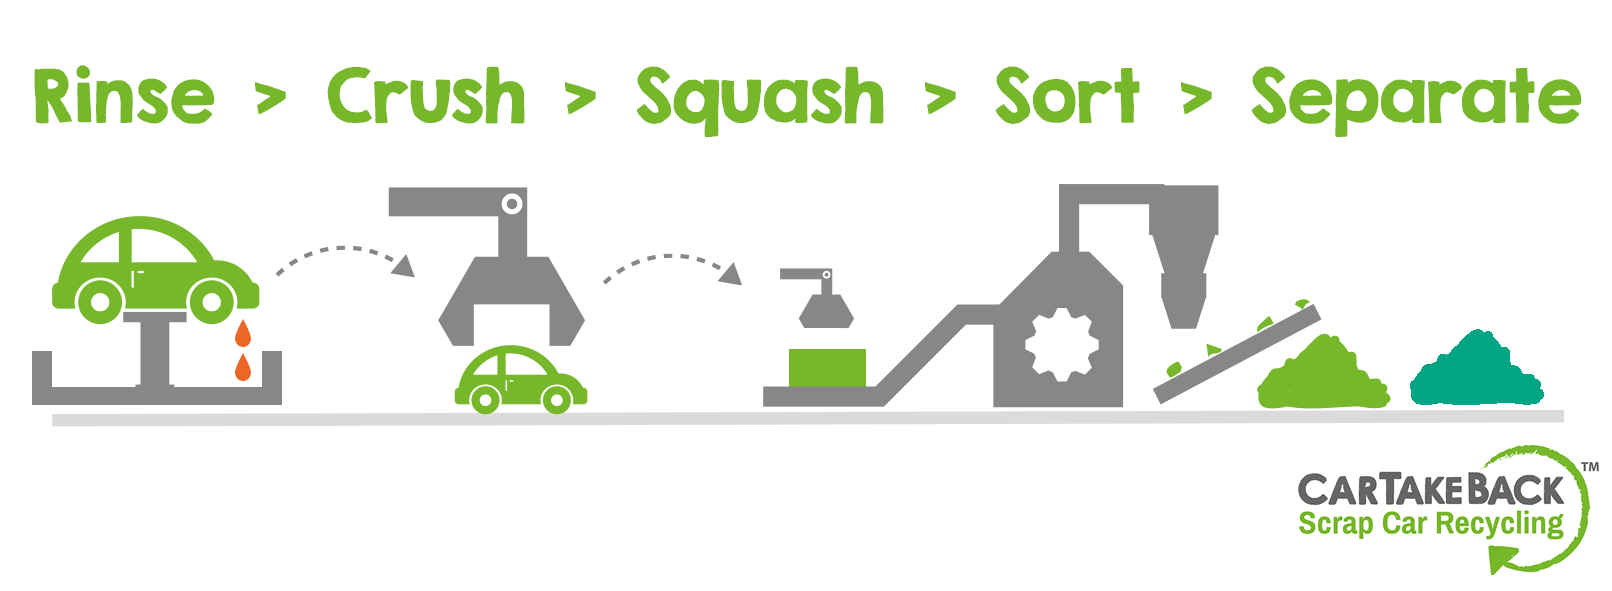 Scrap car recycling process graphic showing a car going through the stages, rinse, crush, squash, sort and separate